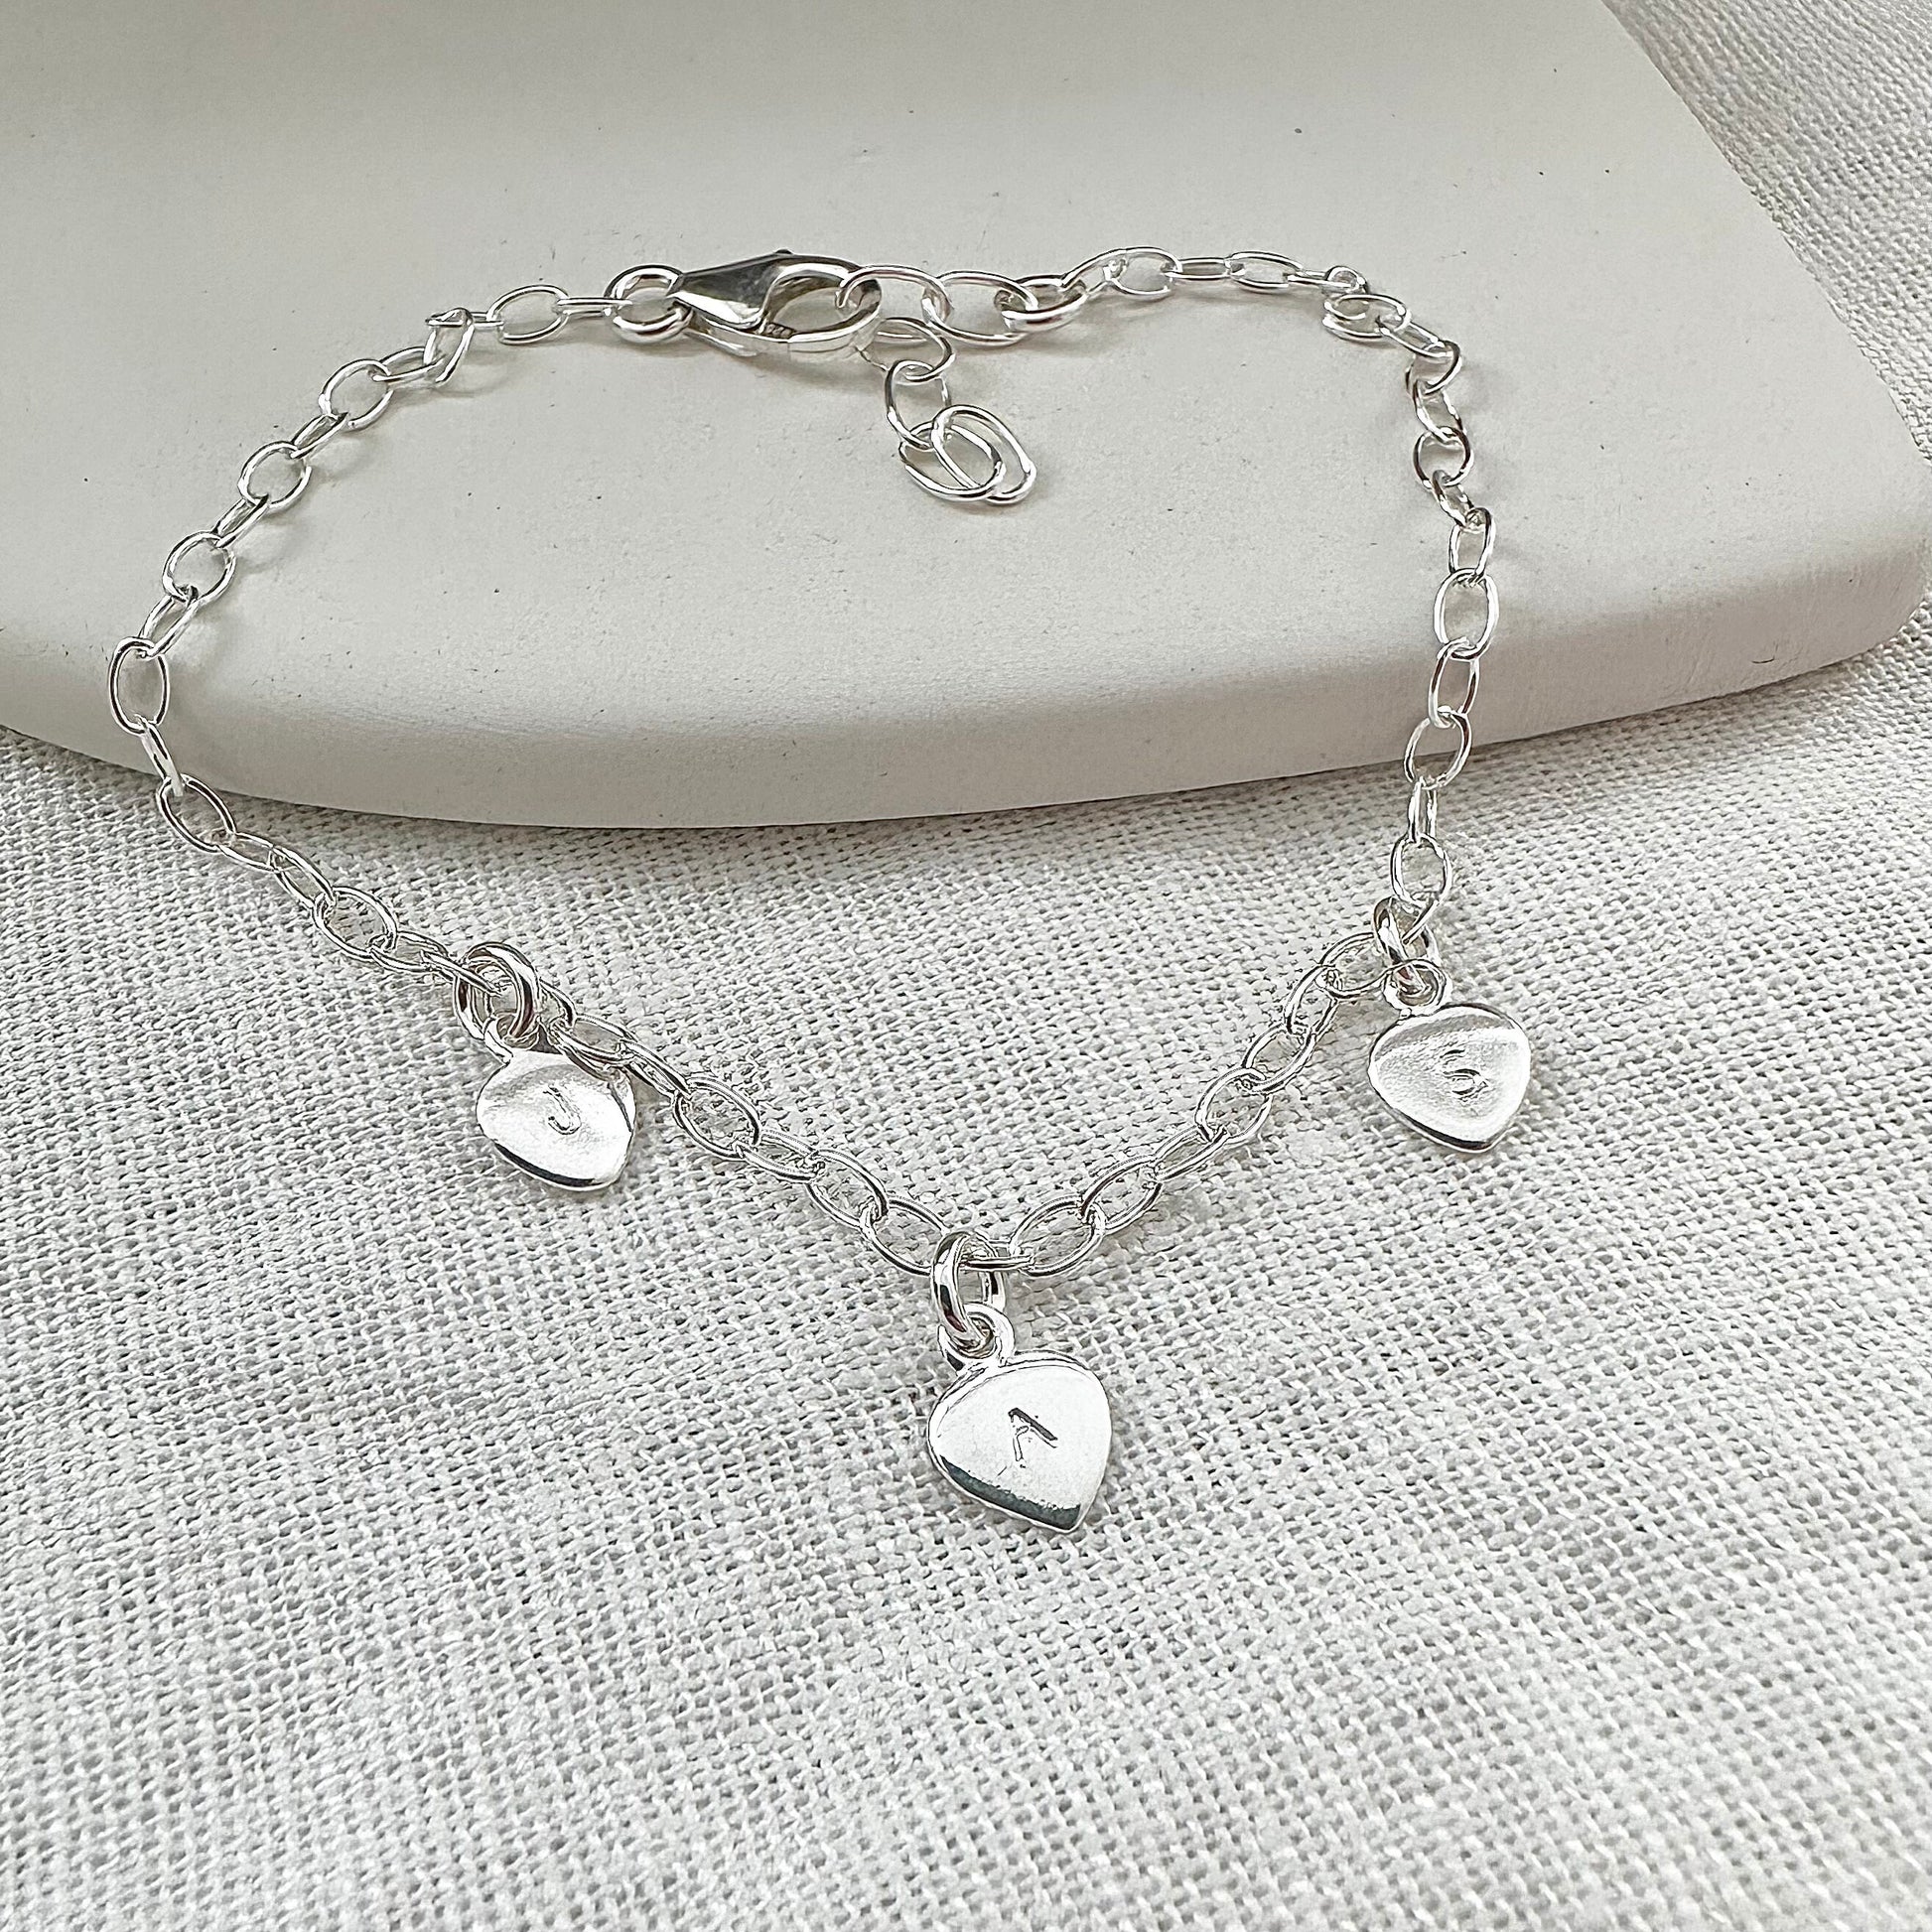 Tiny Initials Bracelet with Family Initials, Sterling Silver Chain Jewellery